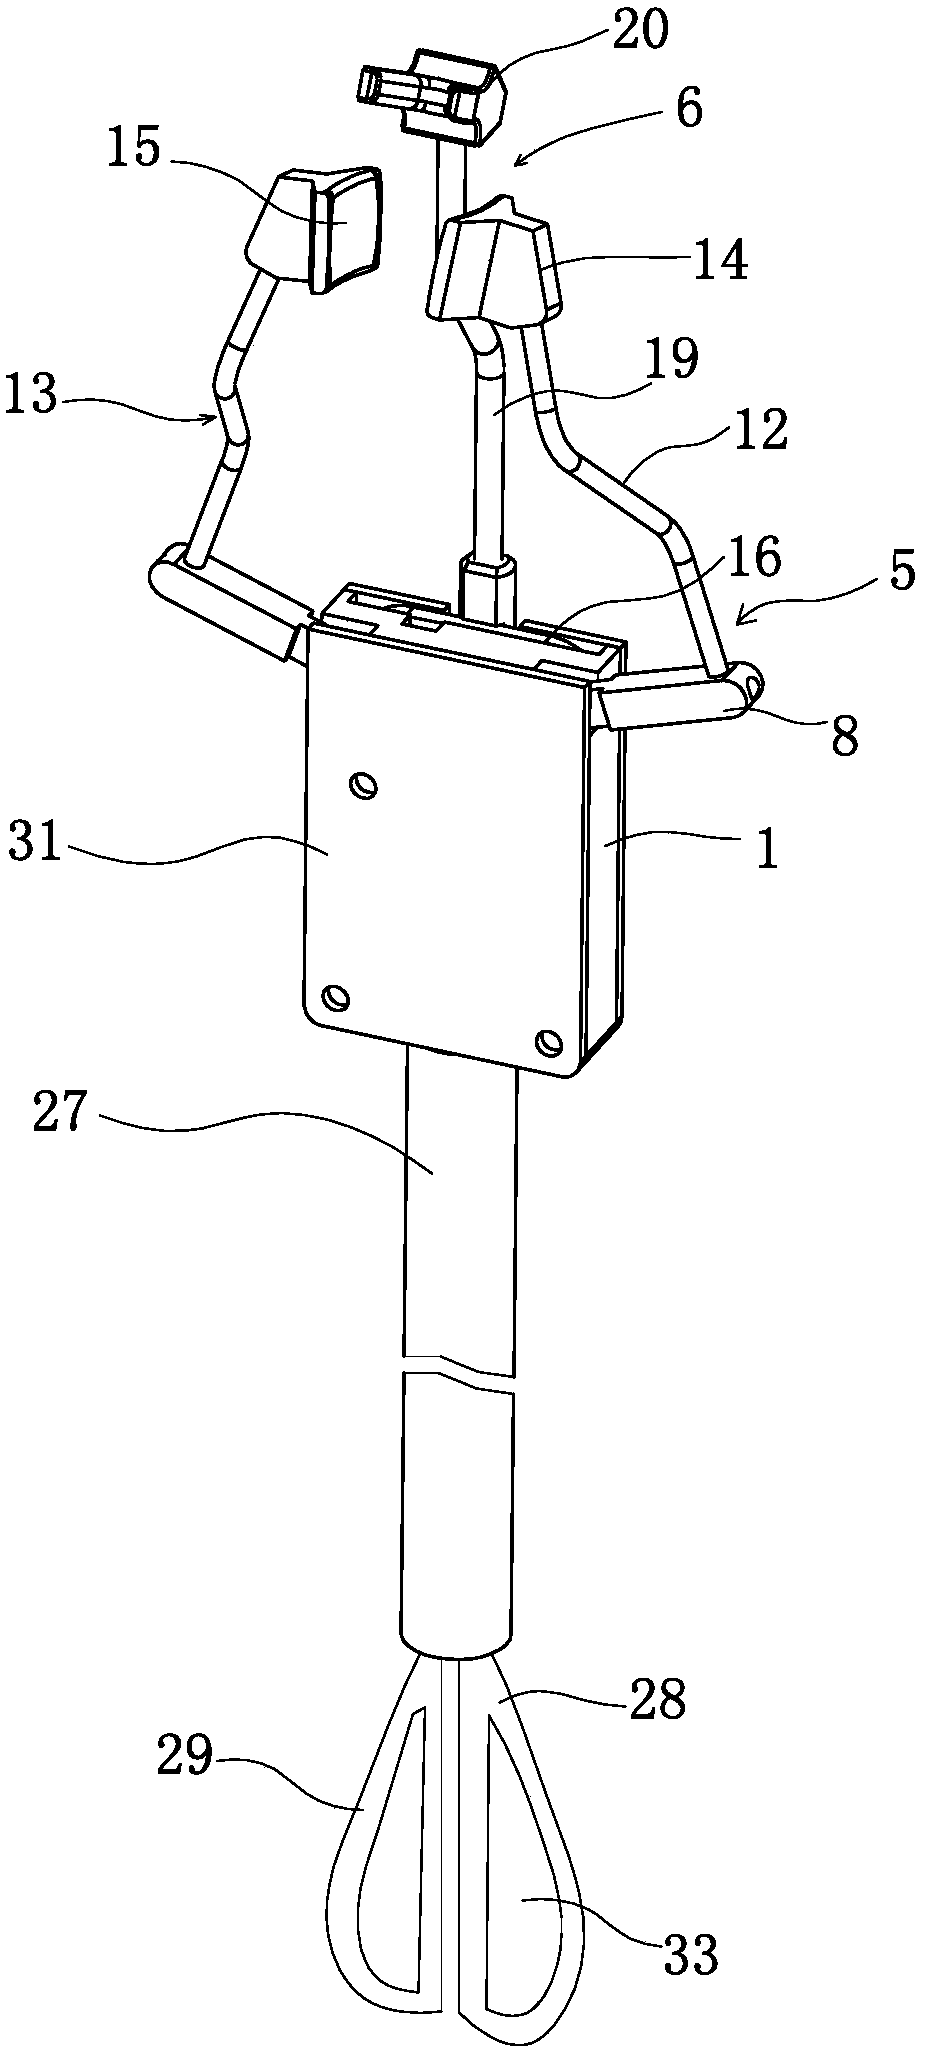 Clamping-pushing two-stage linkage cherry-picking tool